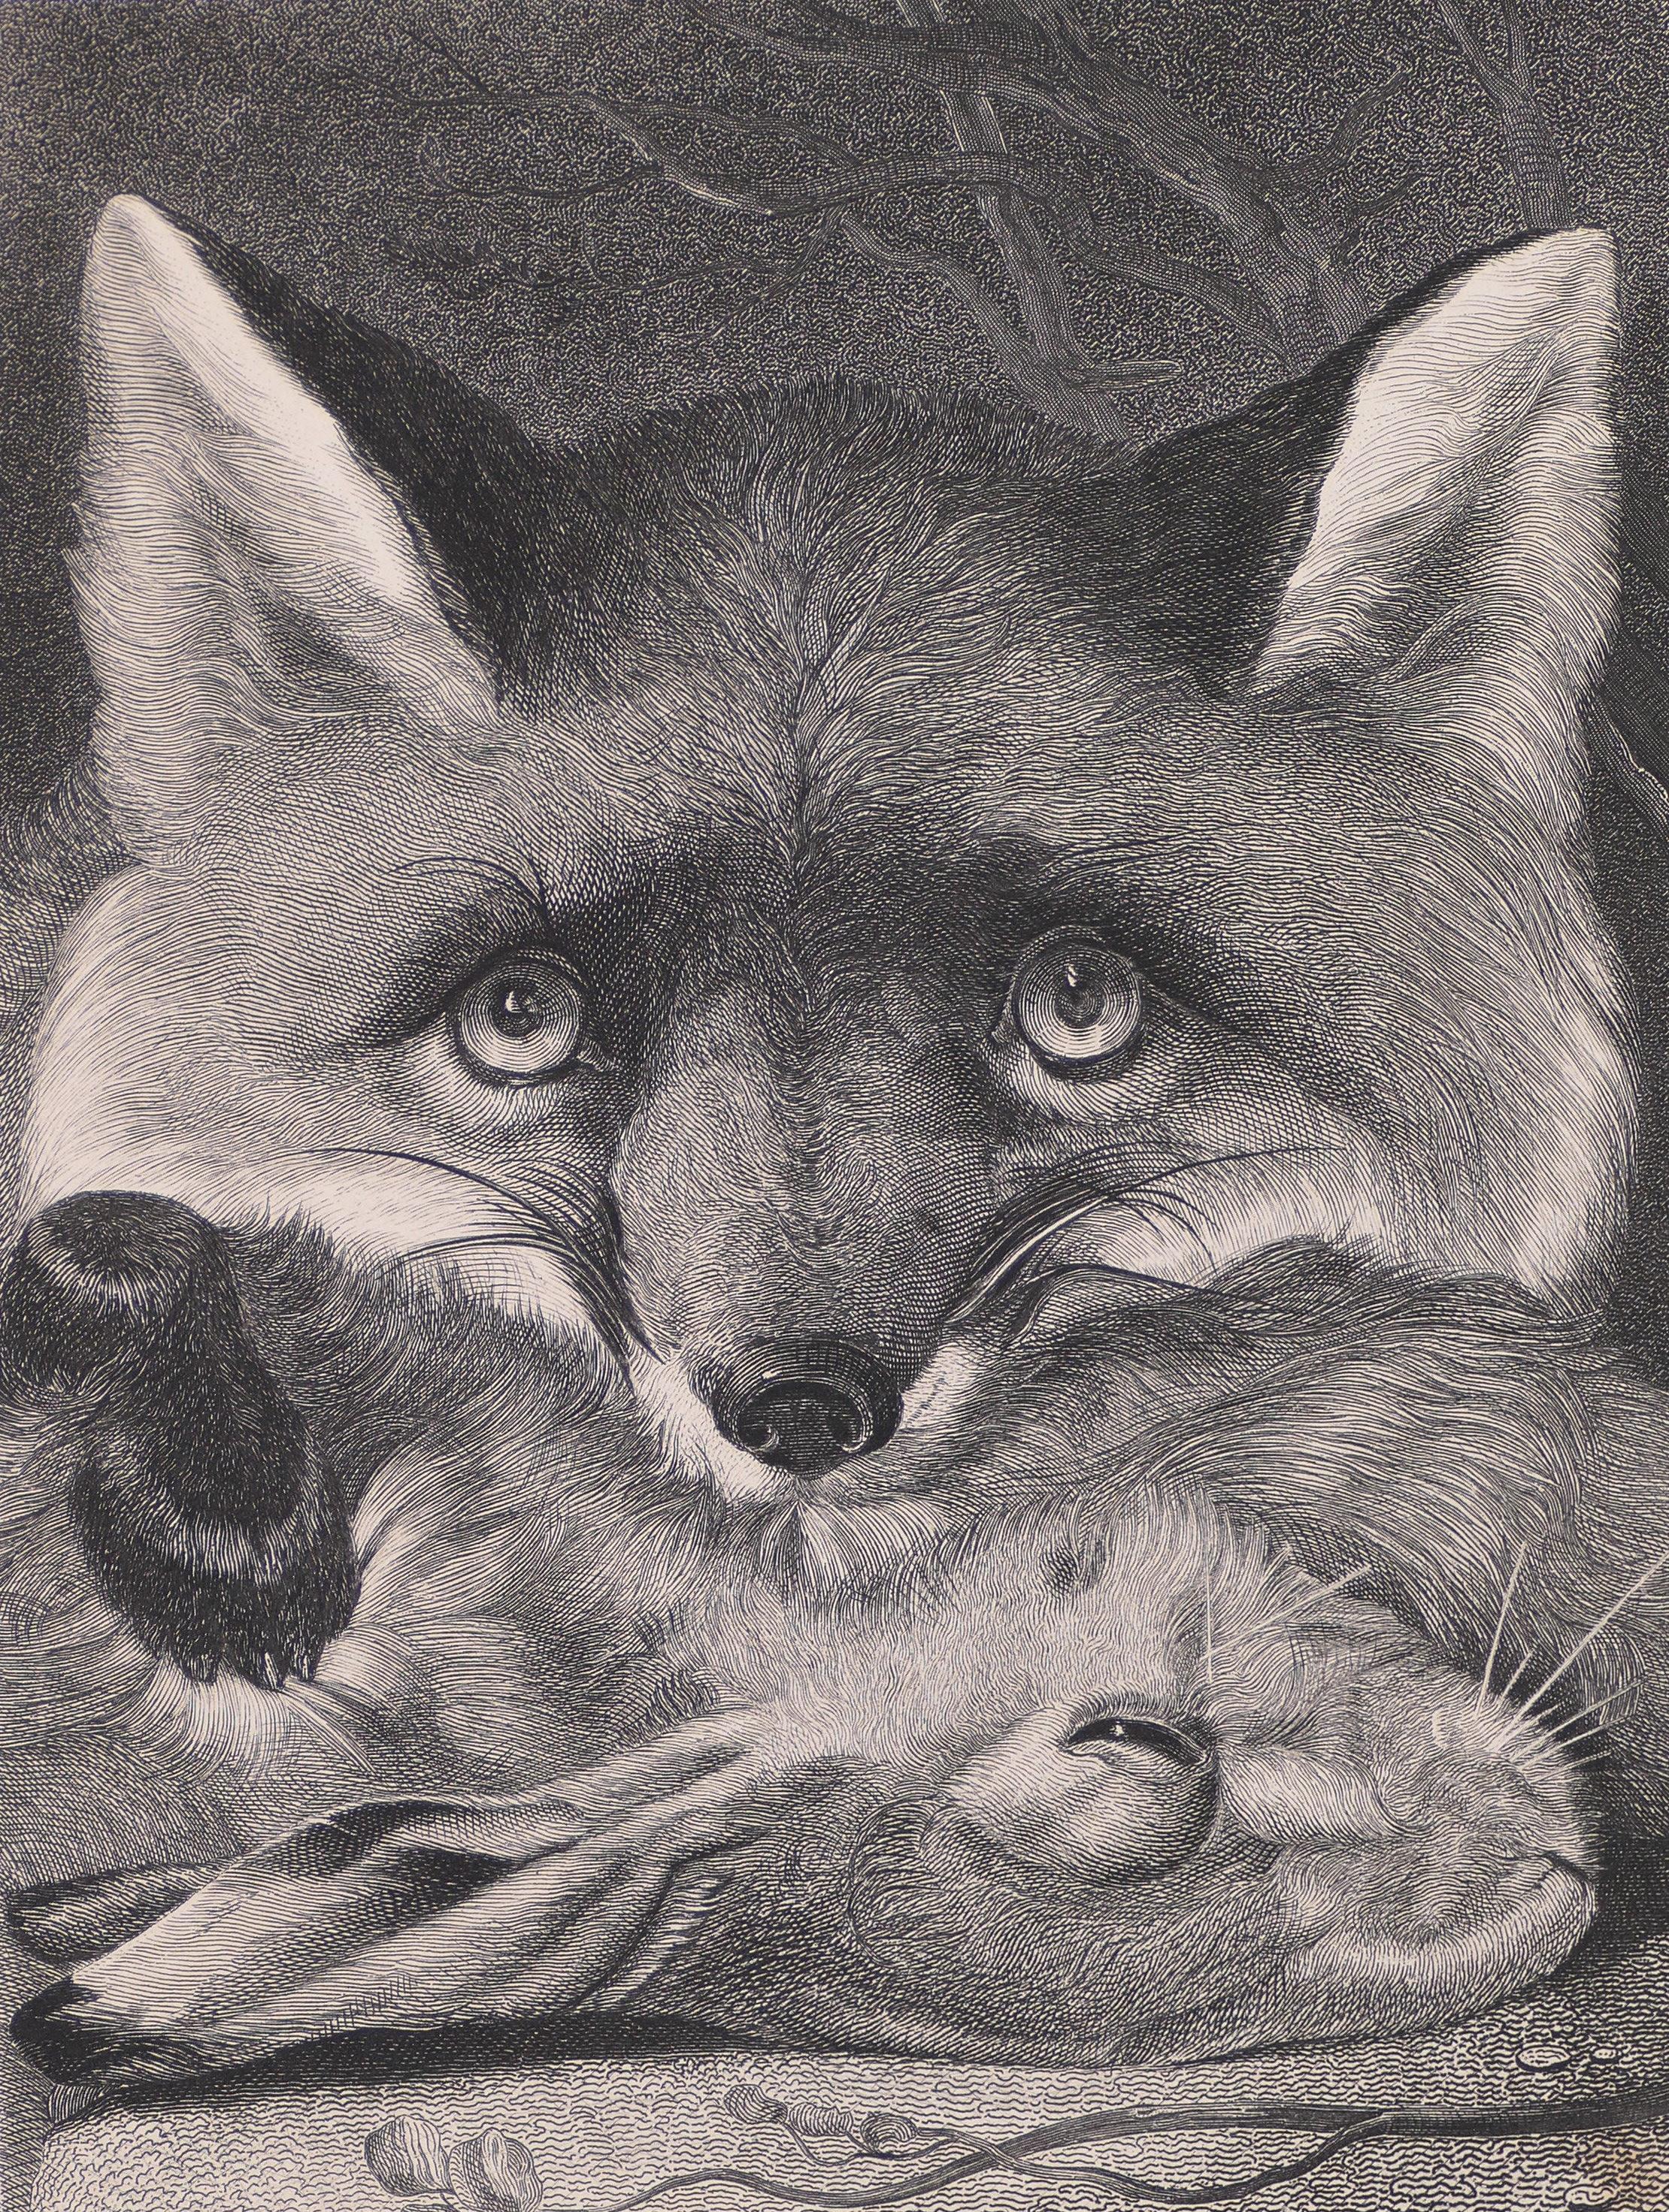 A Fox with its Prey - Original Lithograph - Late 19th Century